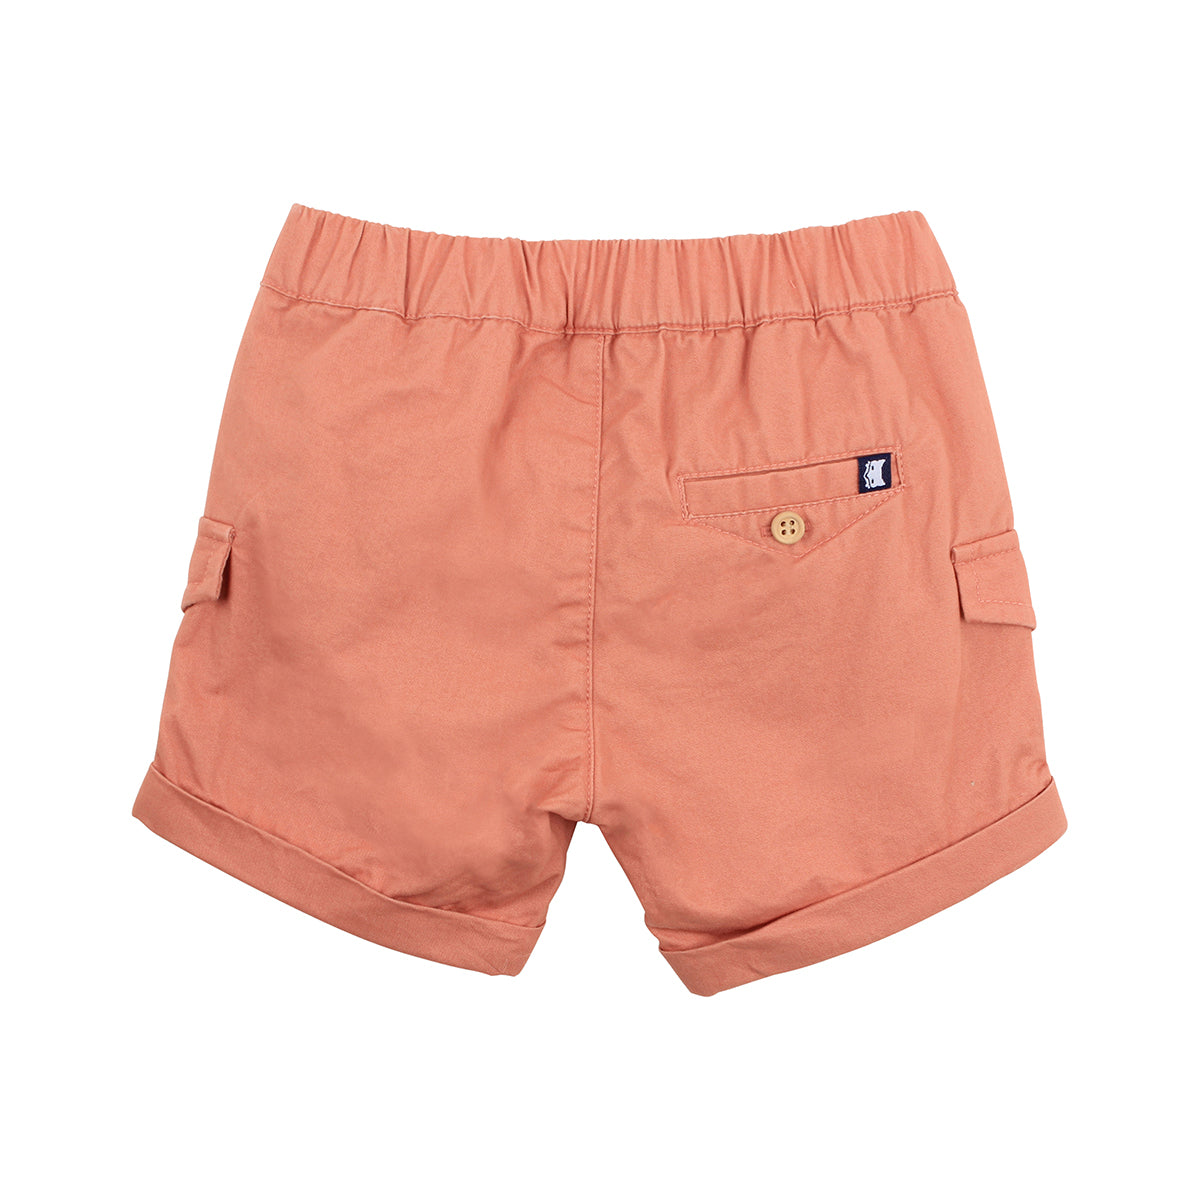 The River Coral Short